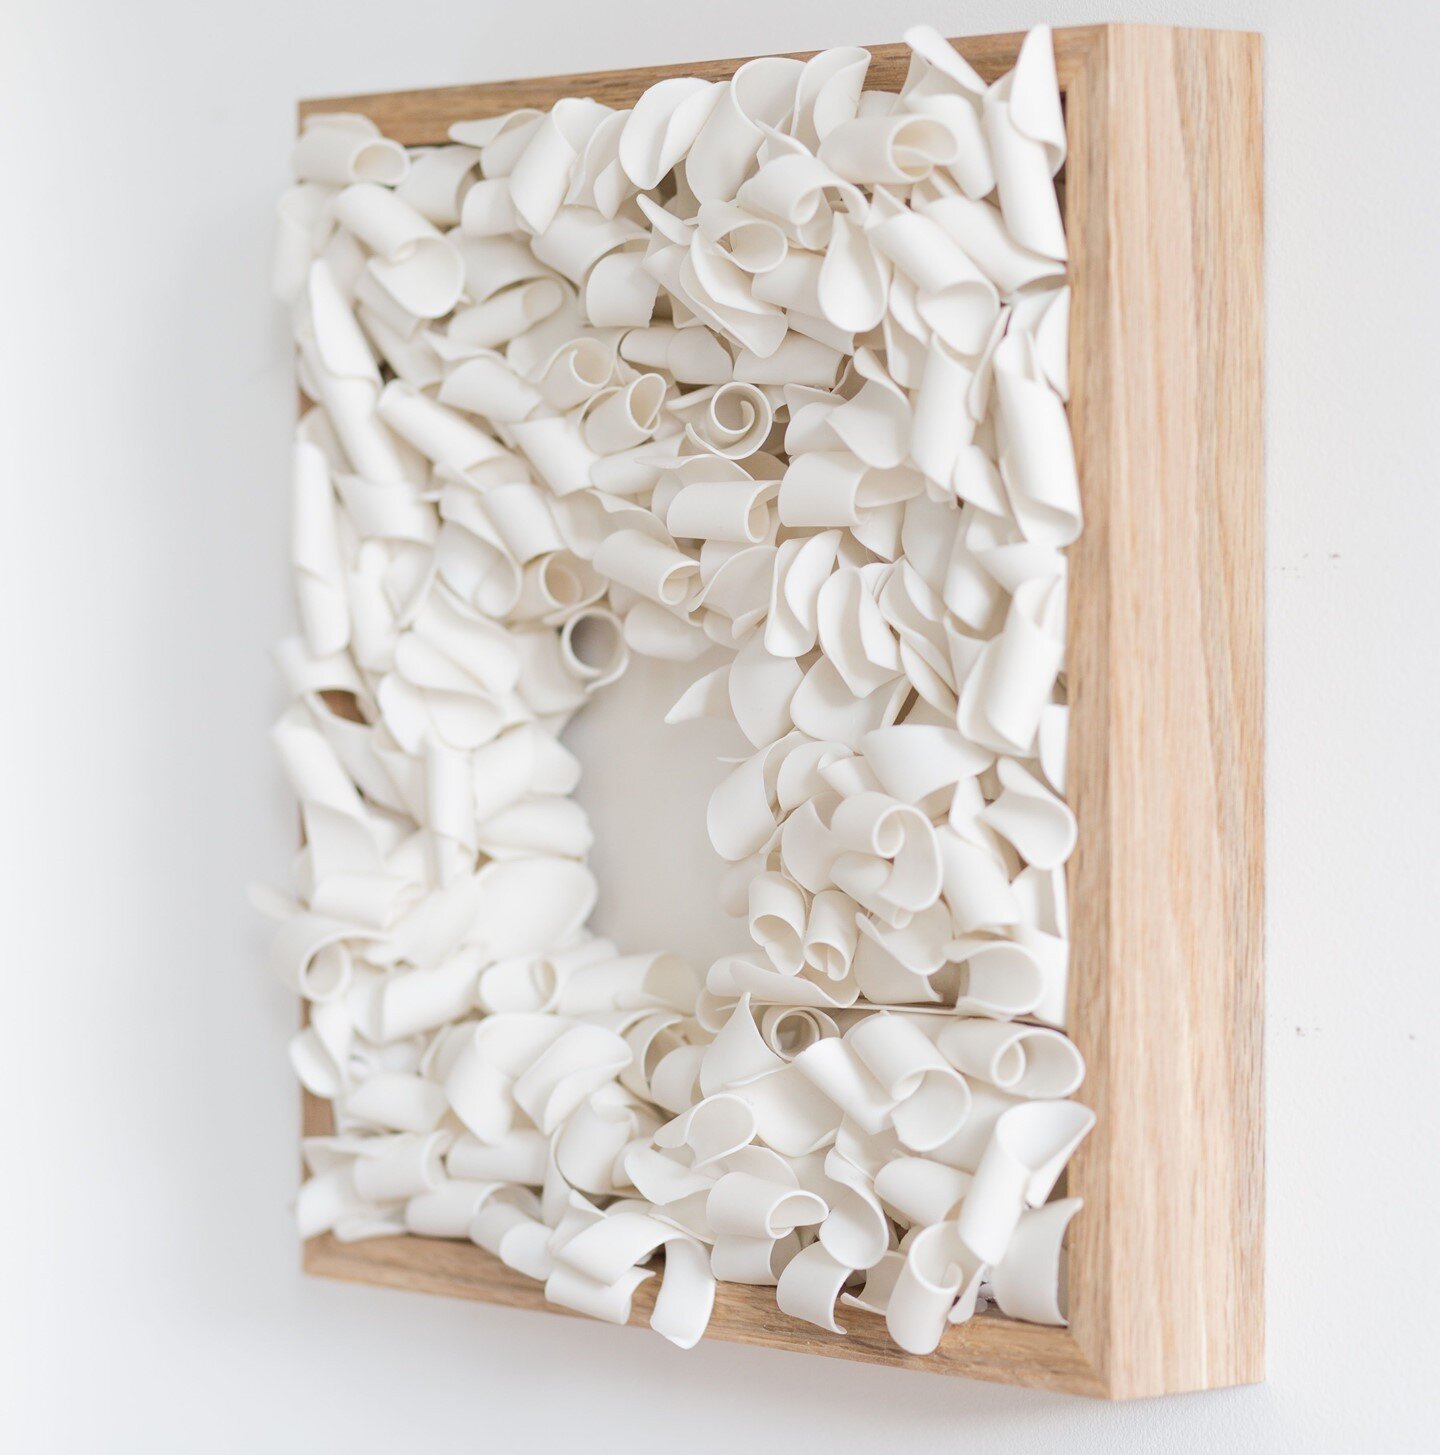 &lsquo;Accumulated memories&rsquo; in oak frame 30/30cm⁣
Also called &lsquo;from the rumble I rise&hellip;&rsquo; developed during the quarantine, exploring the threshold and a passage to an elusive other dimension.⁣
I am very exited to be exploring 